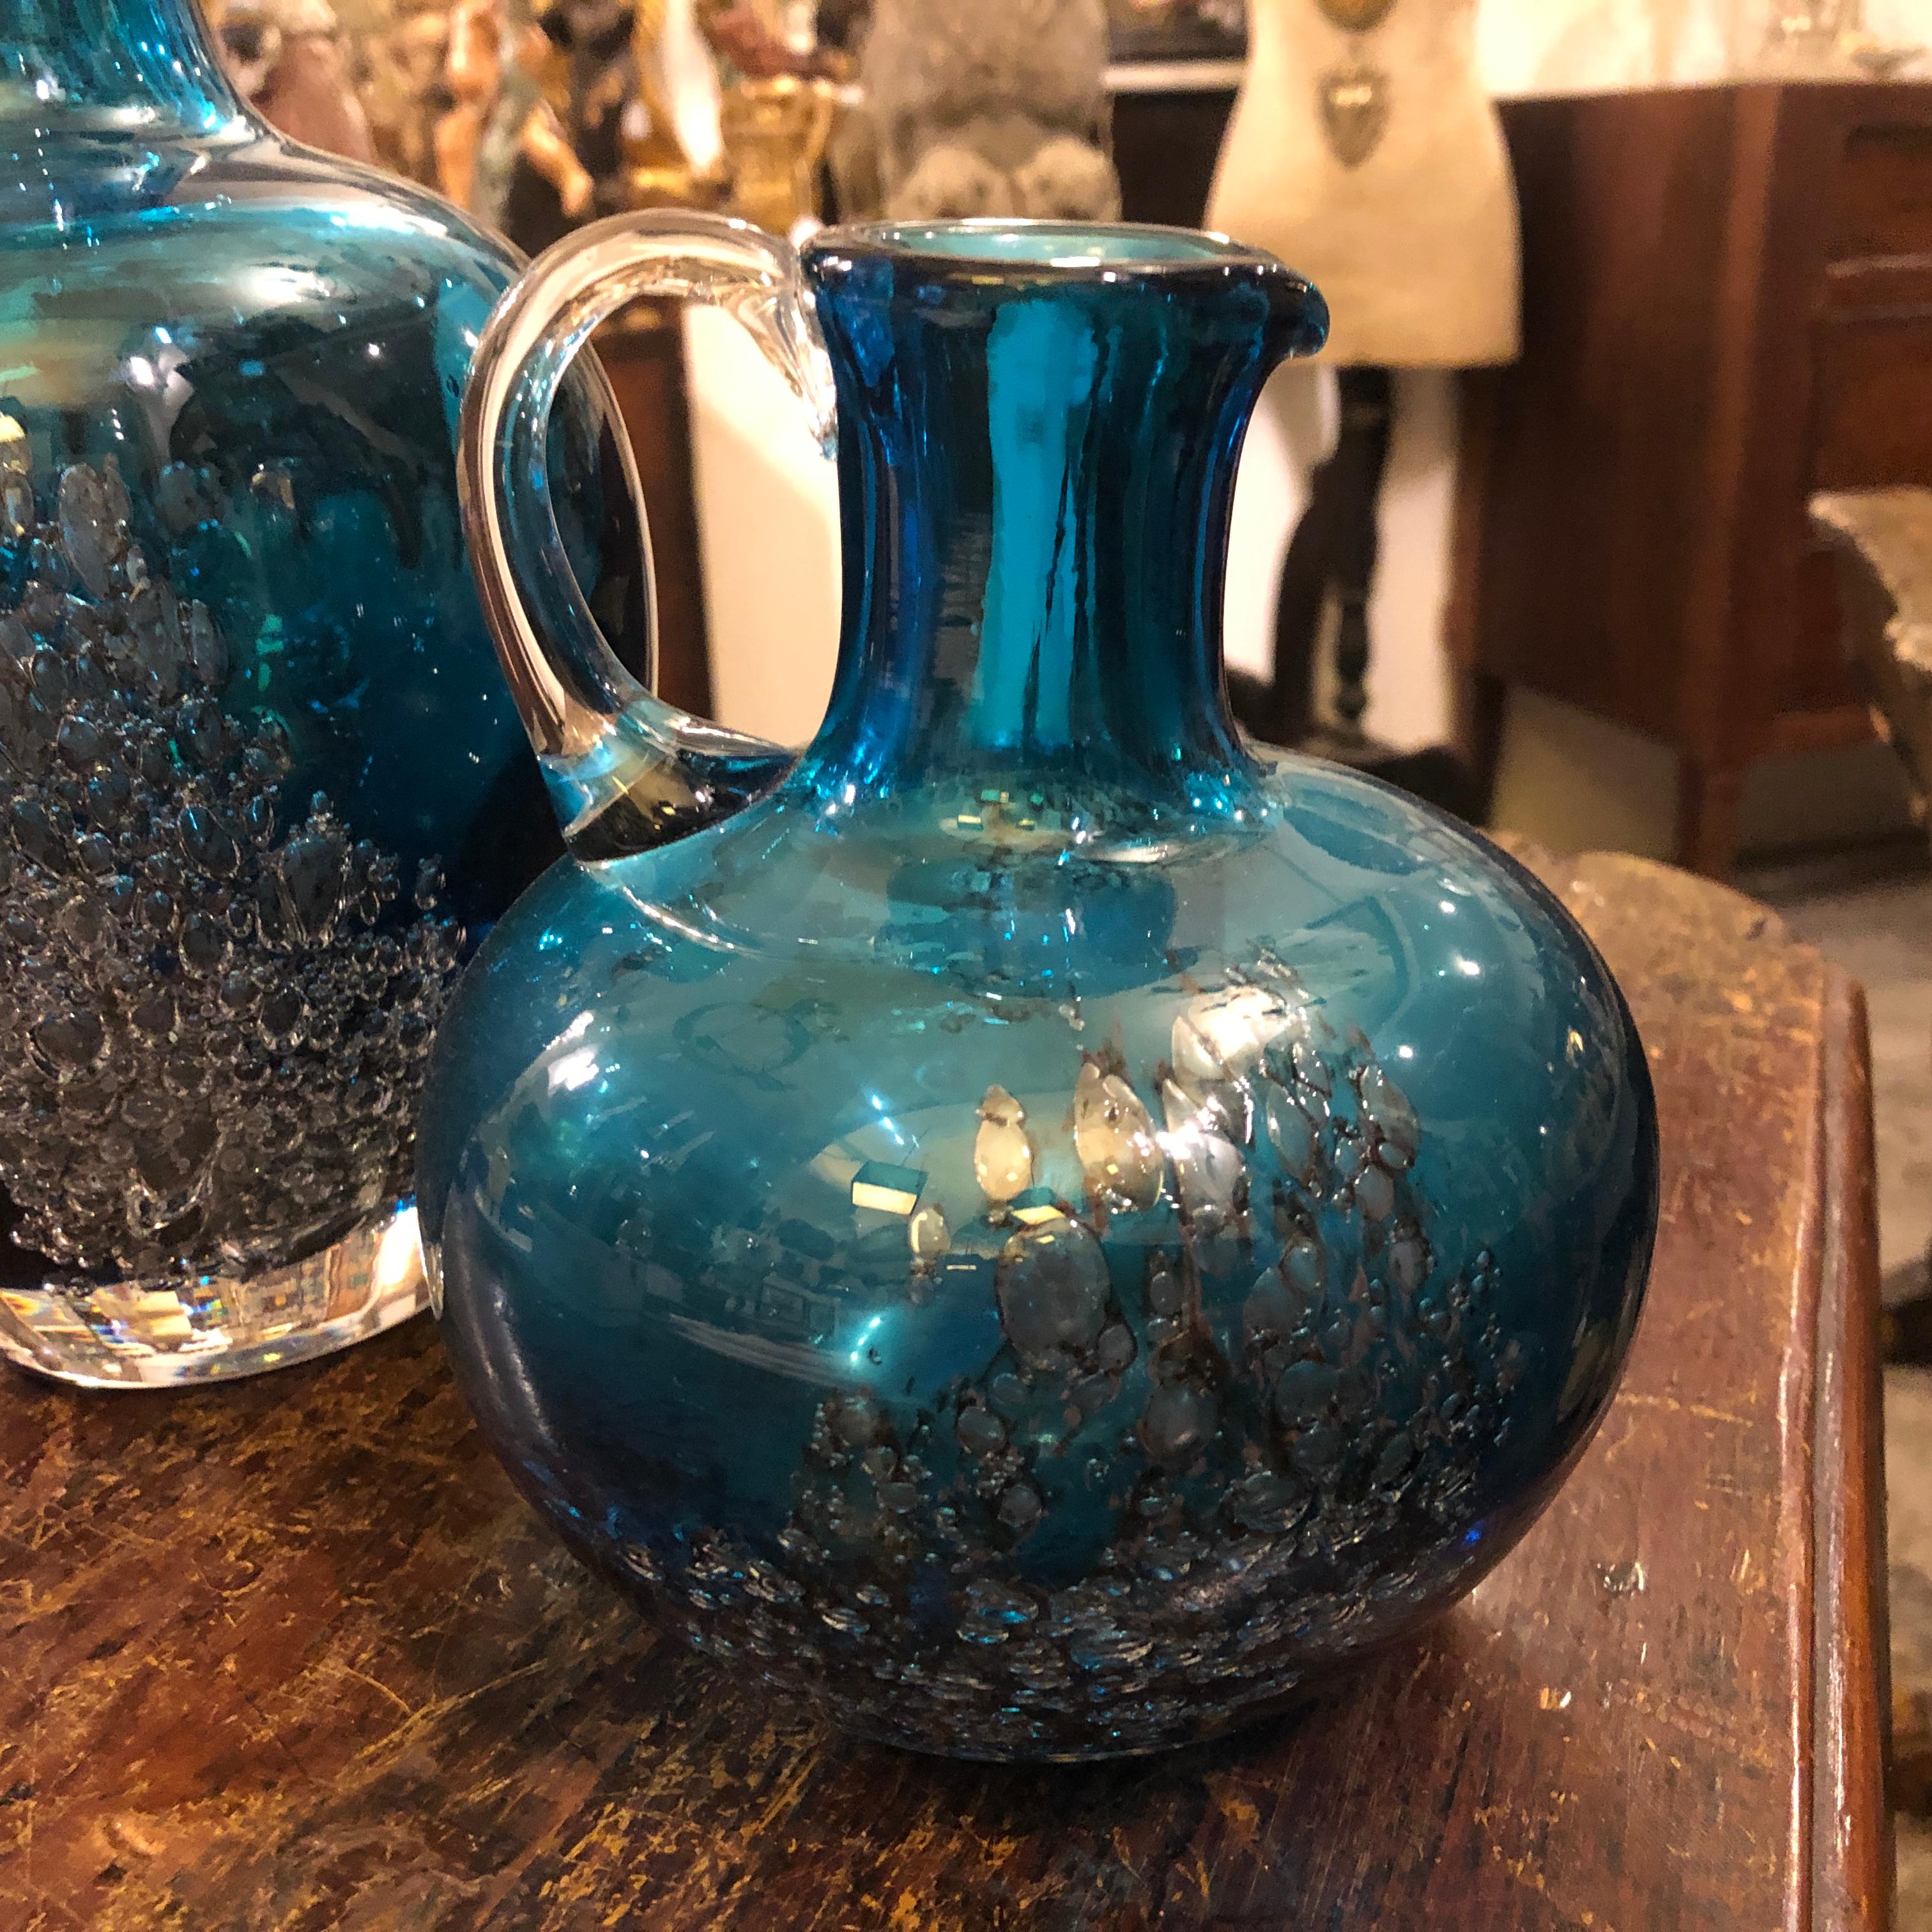 Two particular blue glass jugs in perfect conditions manufactured in Germany by Schott Zwiesel, diemnsion of the small jug size height cm 17, diameter cm 14.